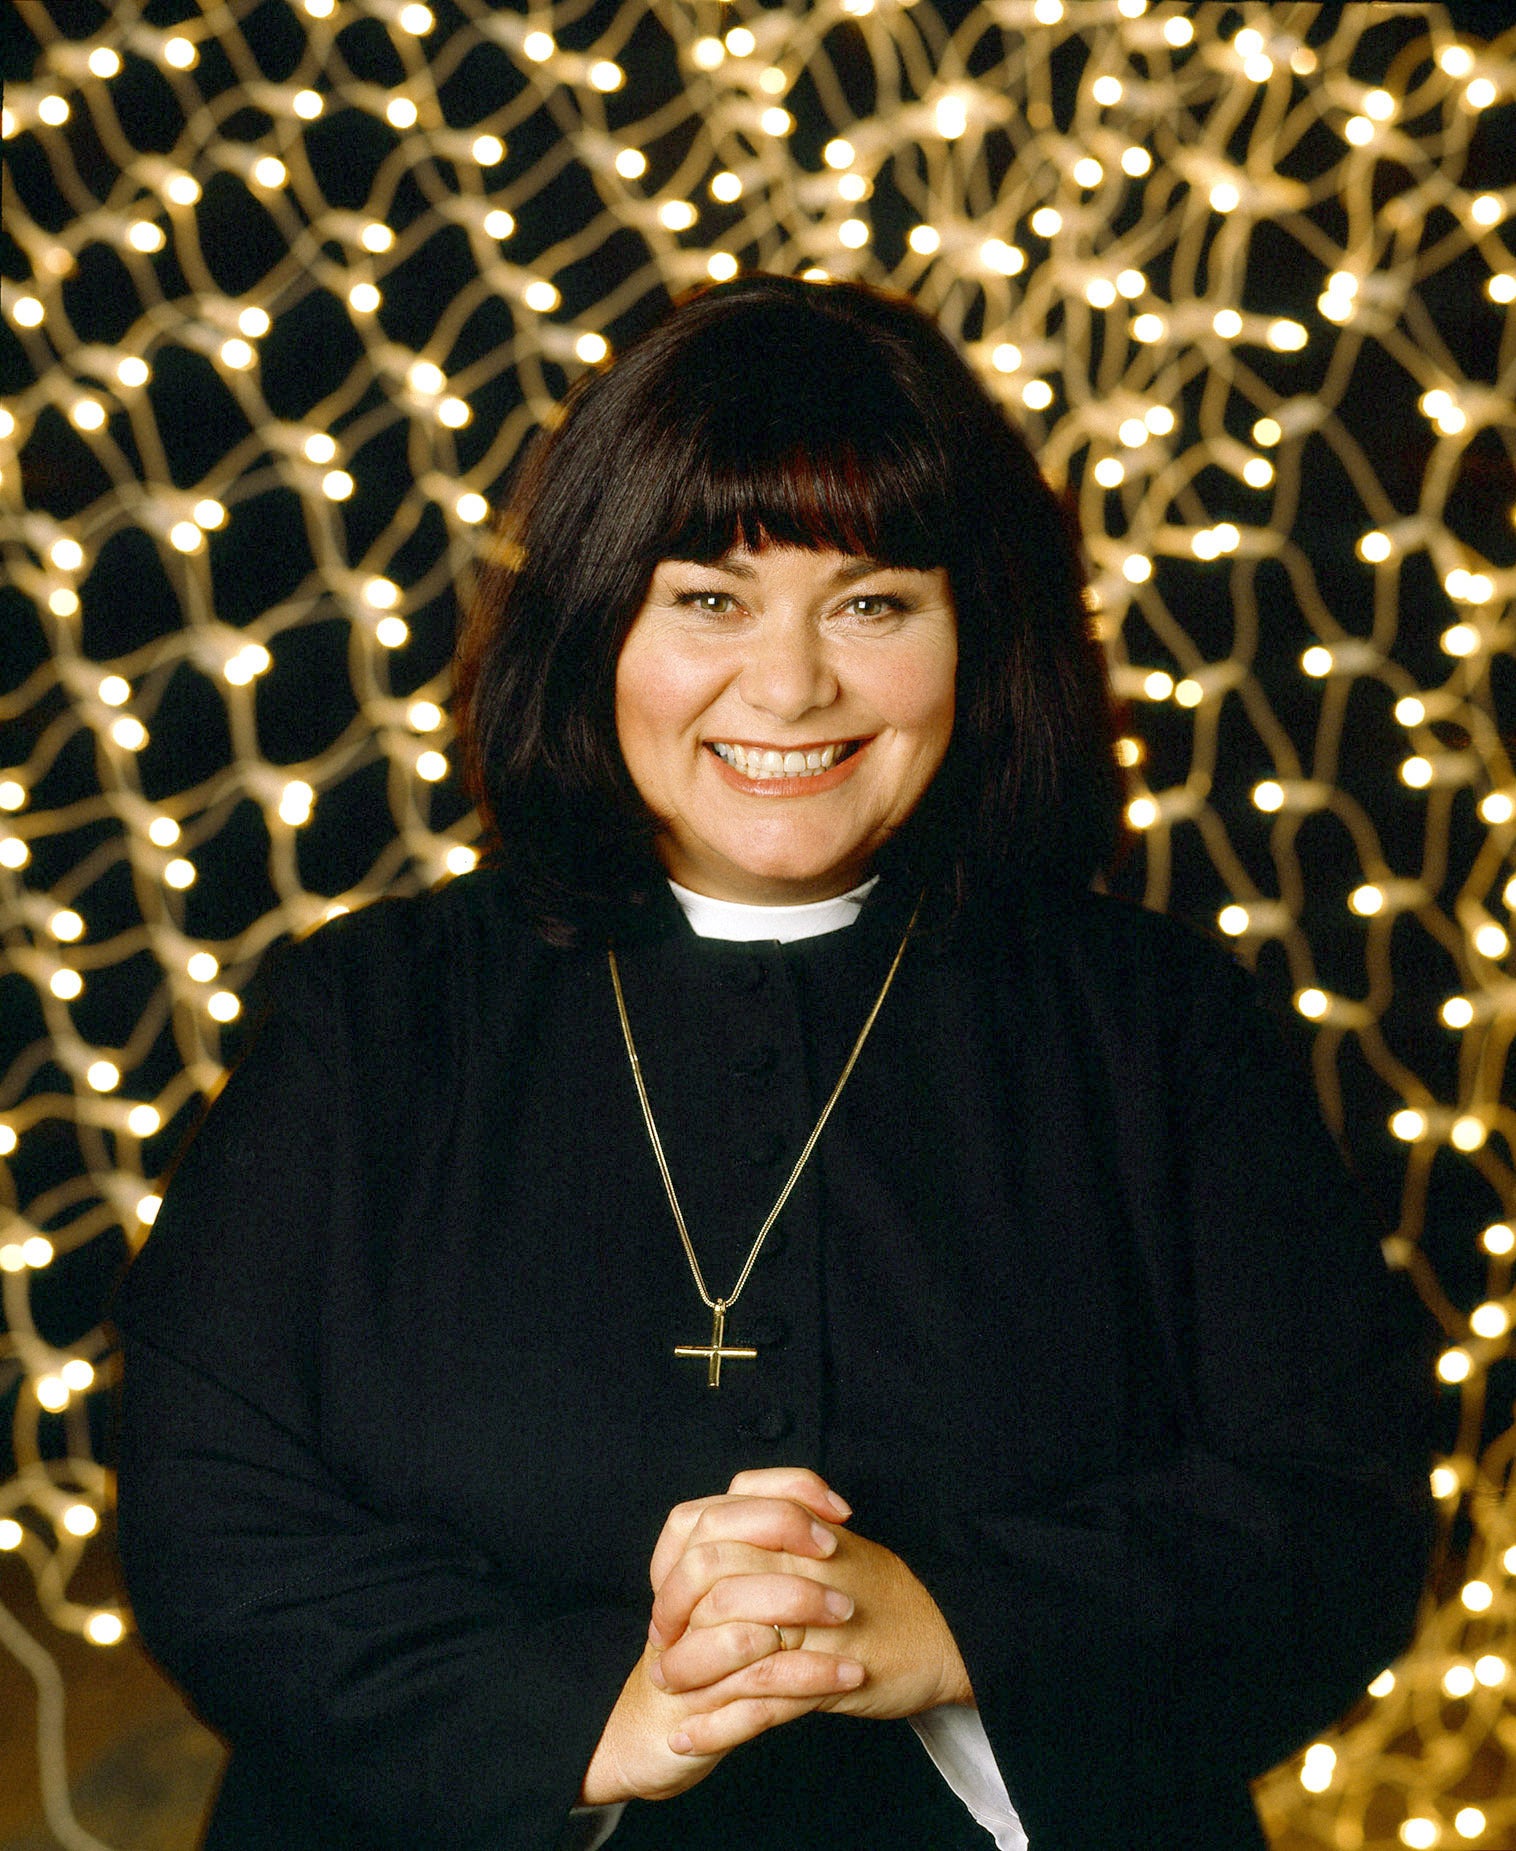 Dawn French who starred in The Vicar of Dibley is a former resident of Fowey